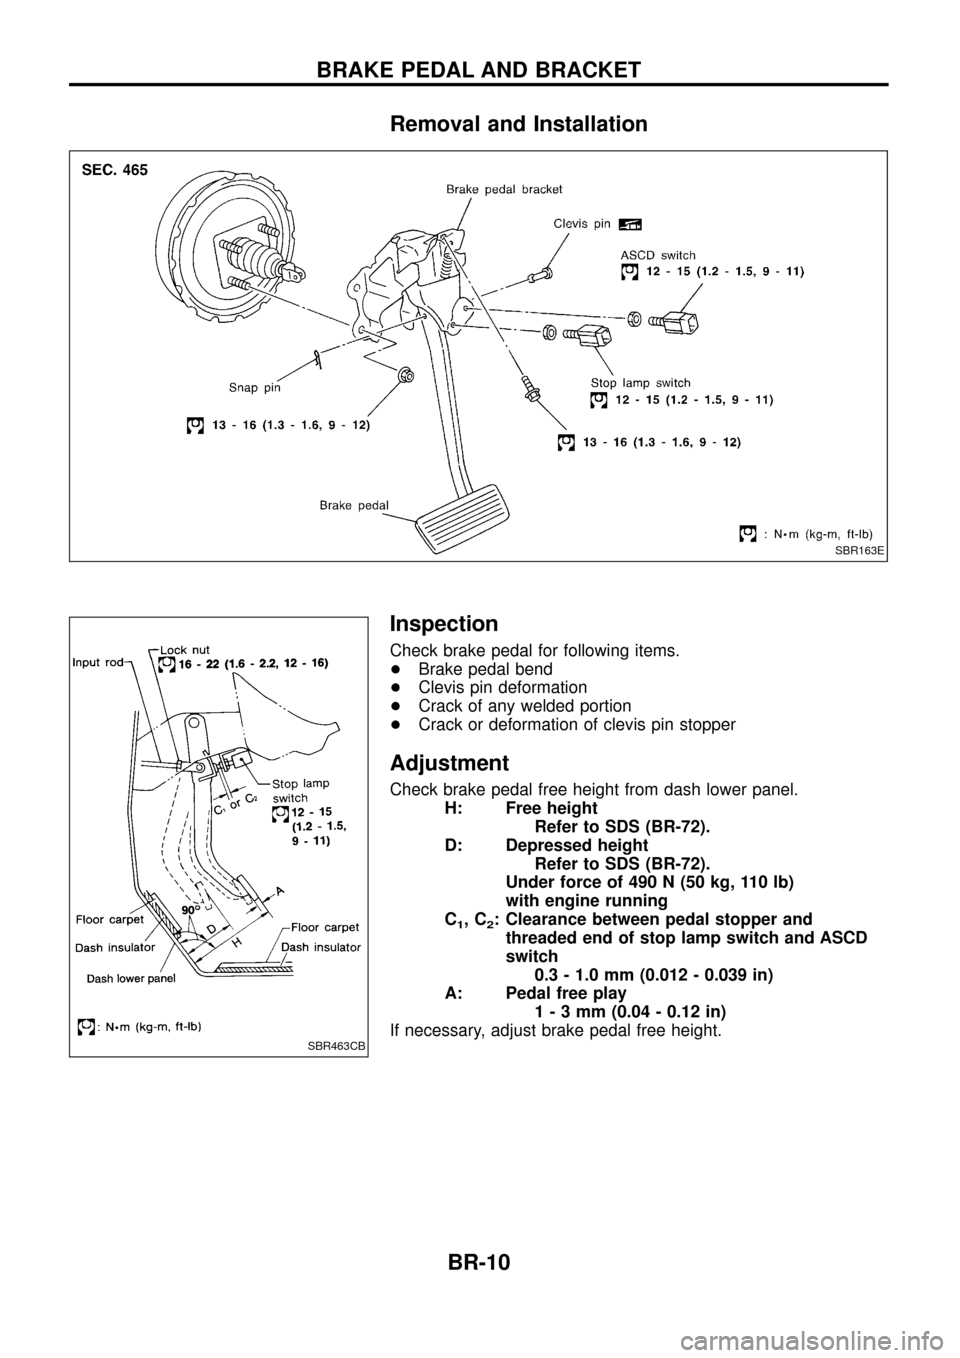 NISSAN PATROL 1998 Y61 / 5.G Brake System User Guide Removal and Installation
Inspection
Check brake pedal for following items.
+Brake pedal bend
+ Clevis pin deformation
+ Crack of any welded portion
+ Crack or deformation of clevis pin stopper
Adjustm